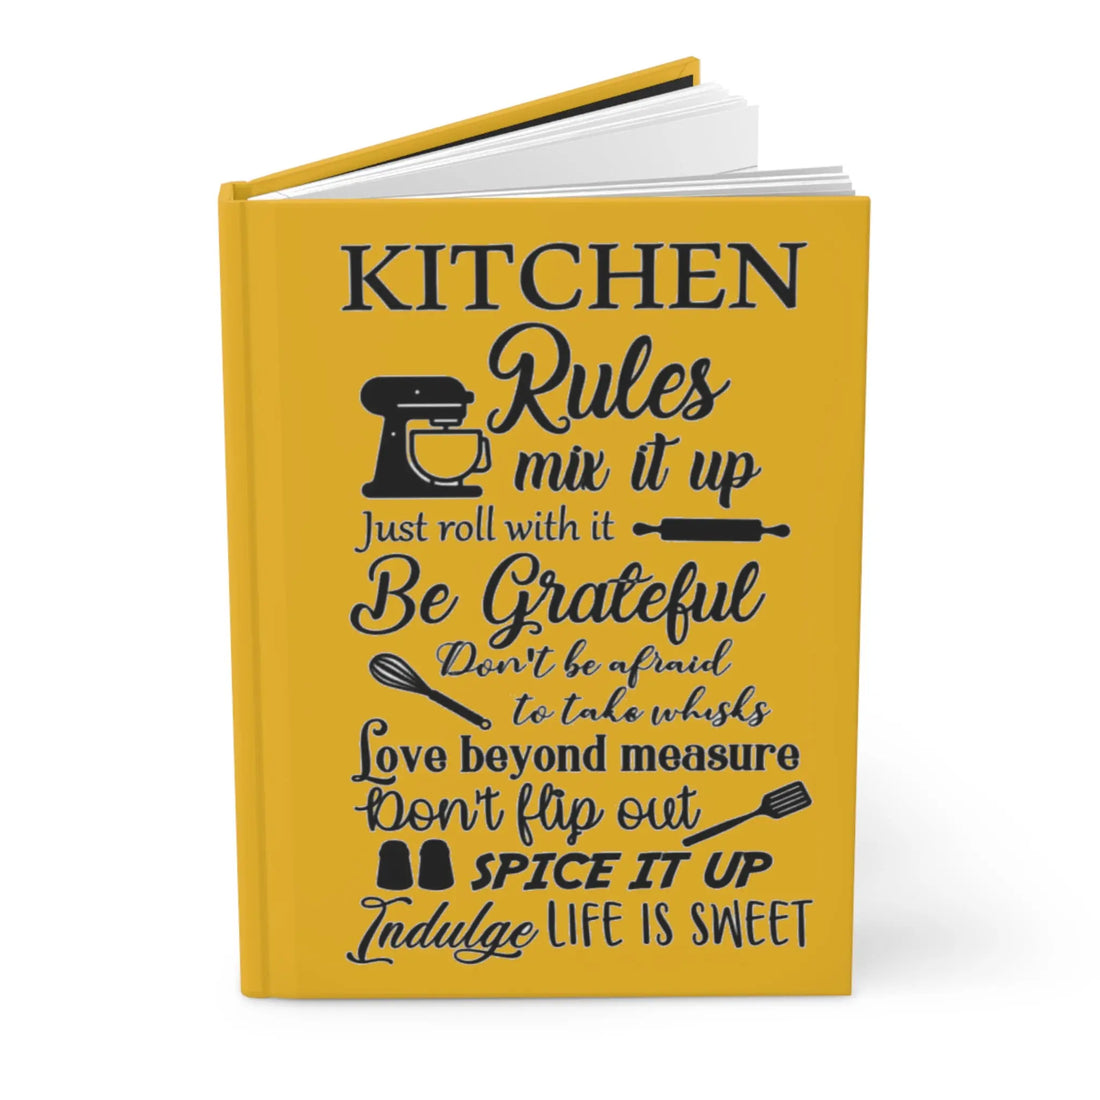 Hardcover Journal Matte Kitchen rules recipe book Personalized Home-clothes-jewelry